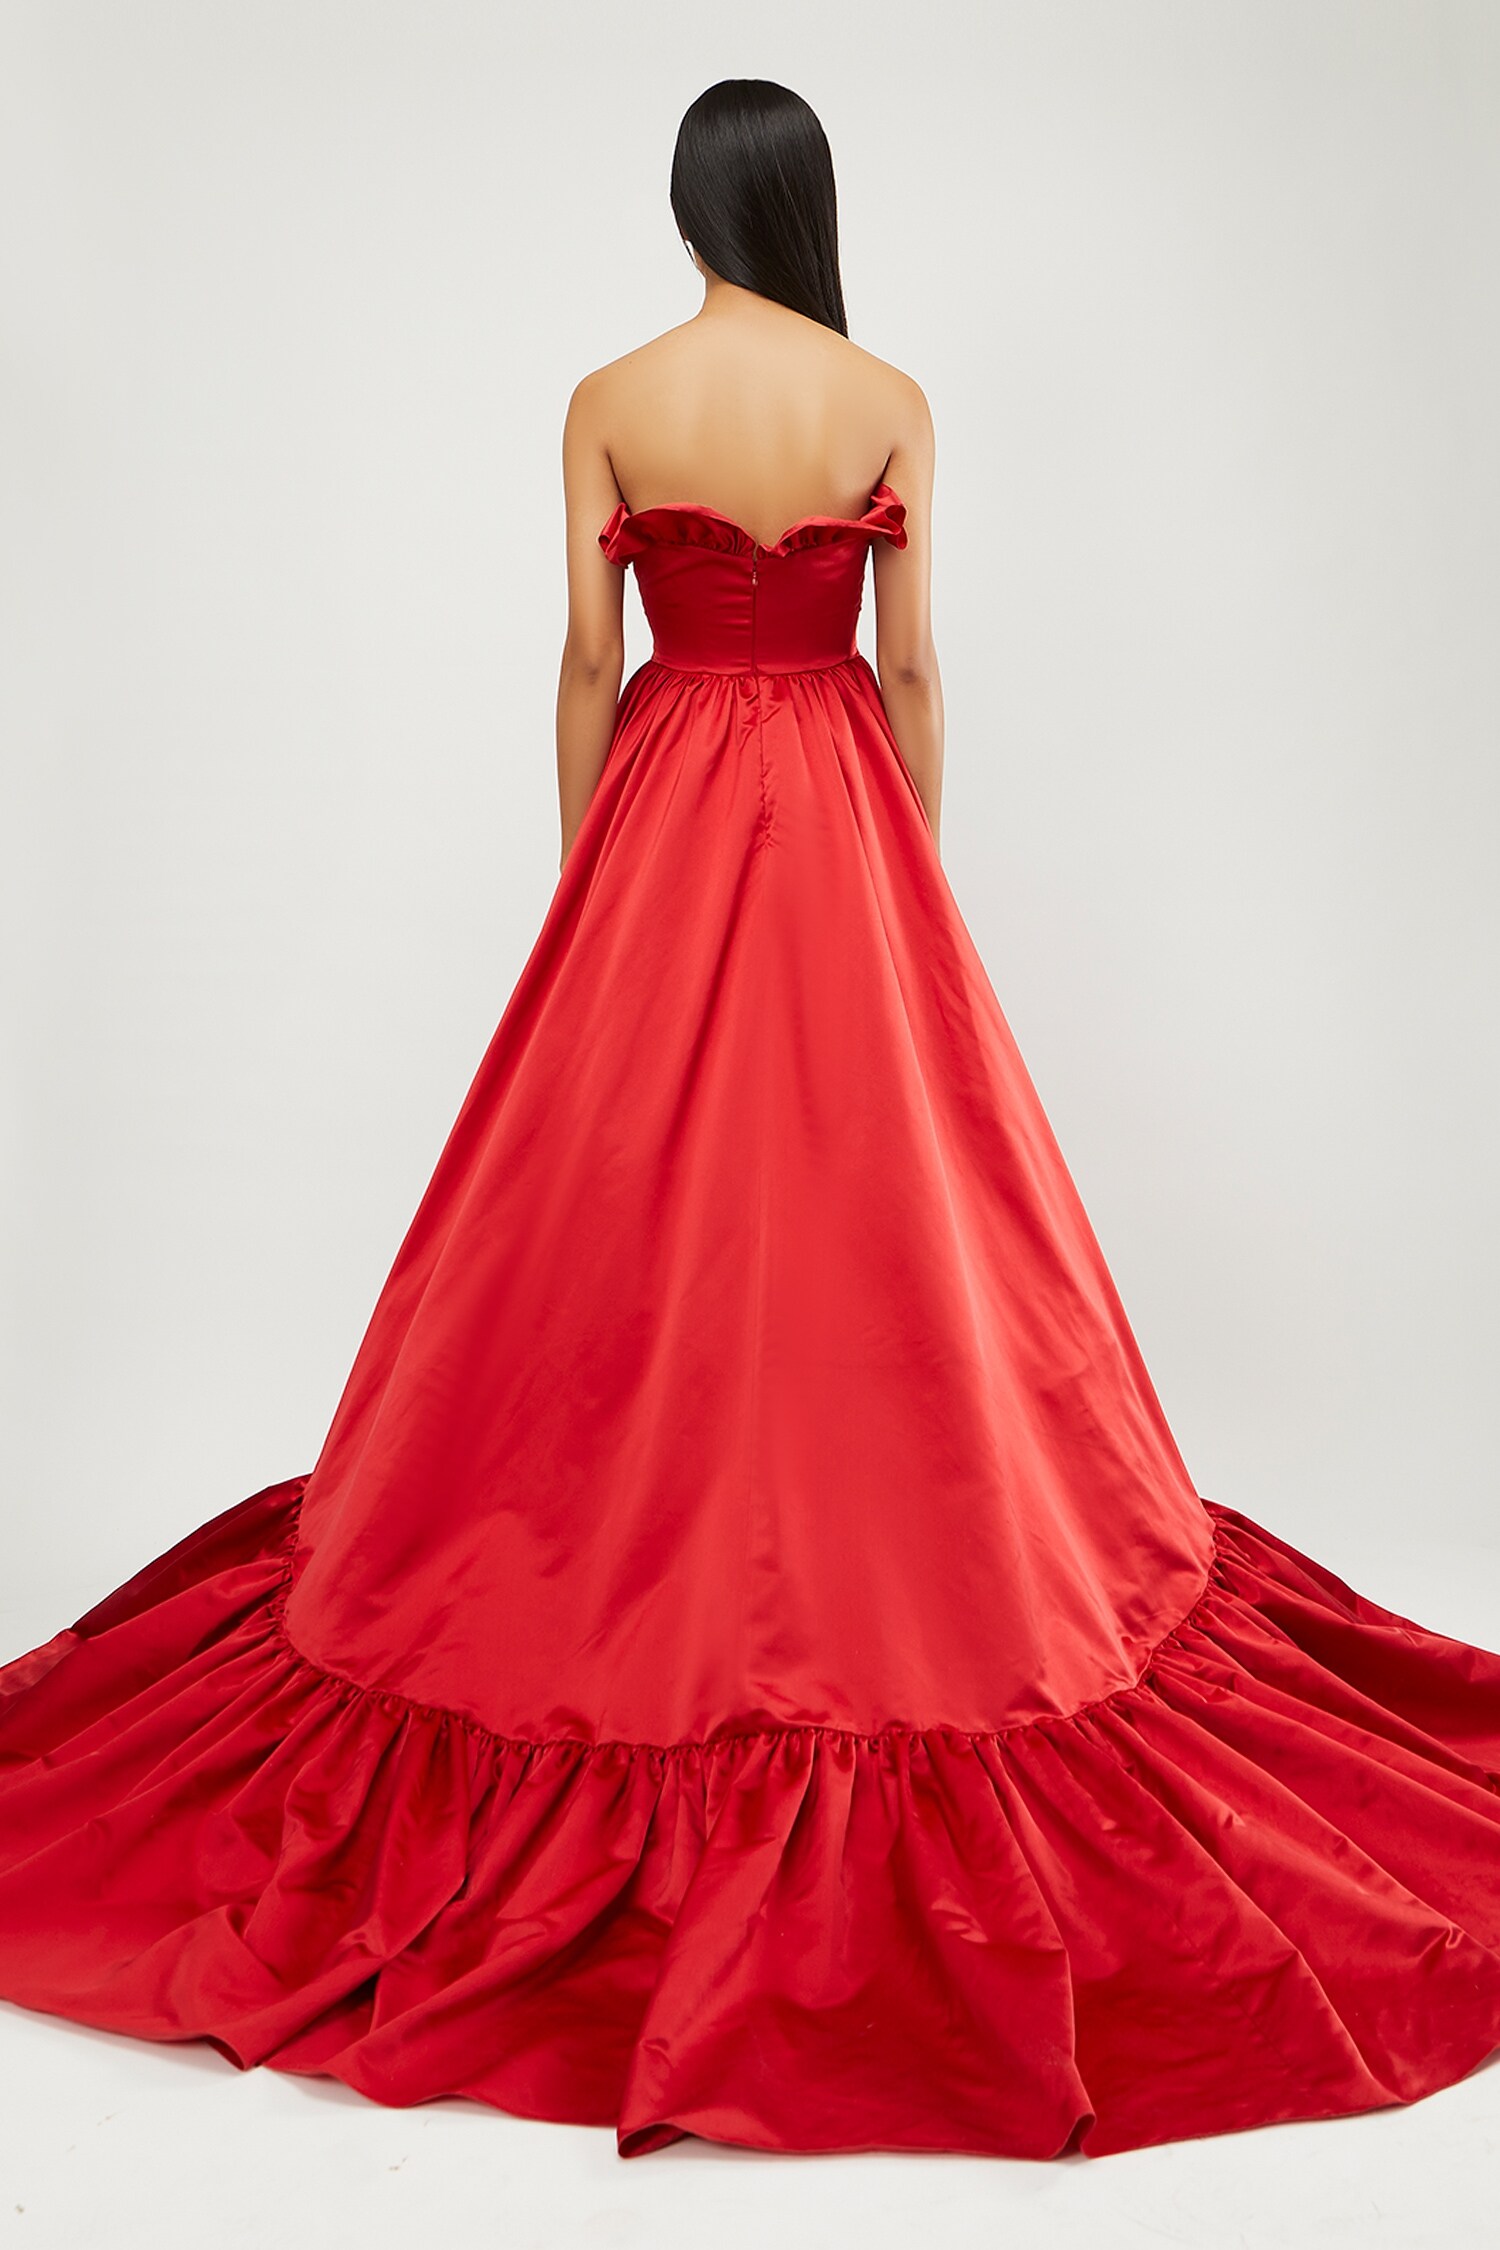 Honey Couture RUBY Red Strapless Ballgown Formal Dress